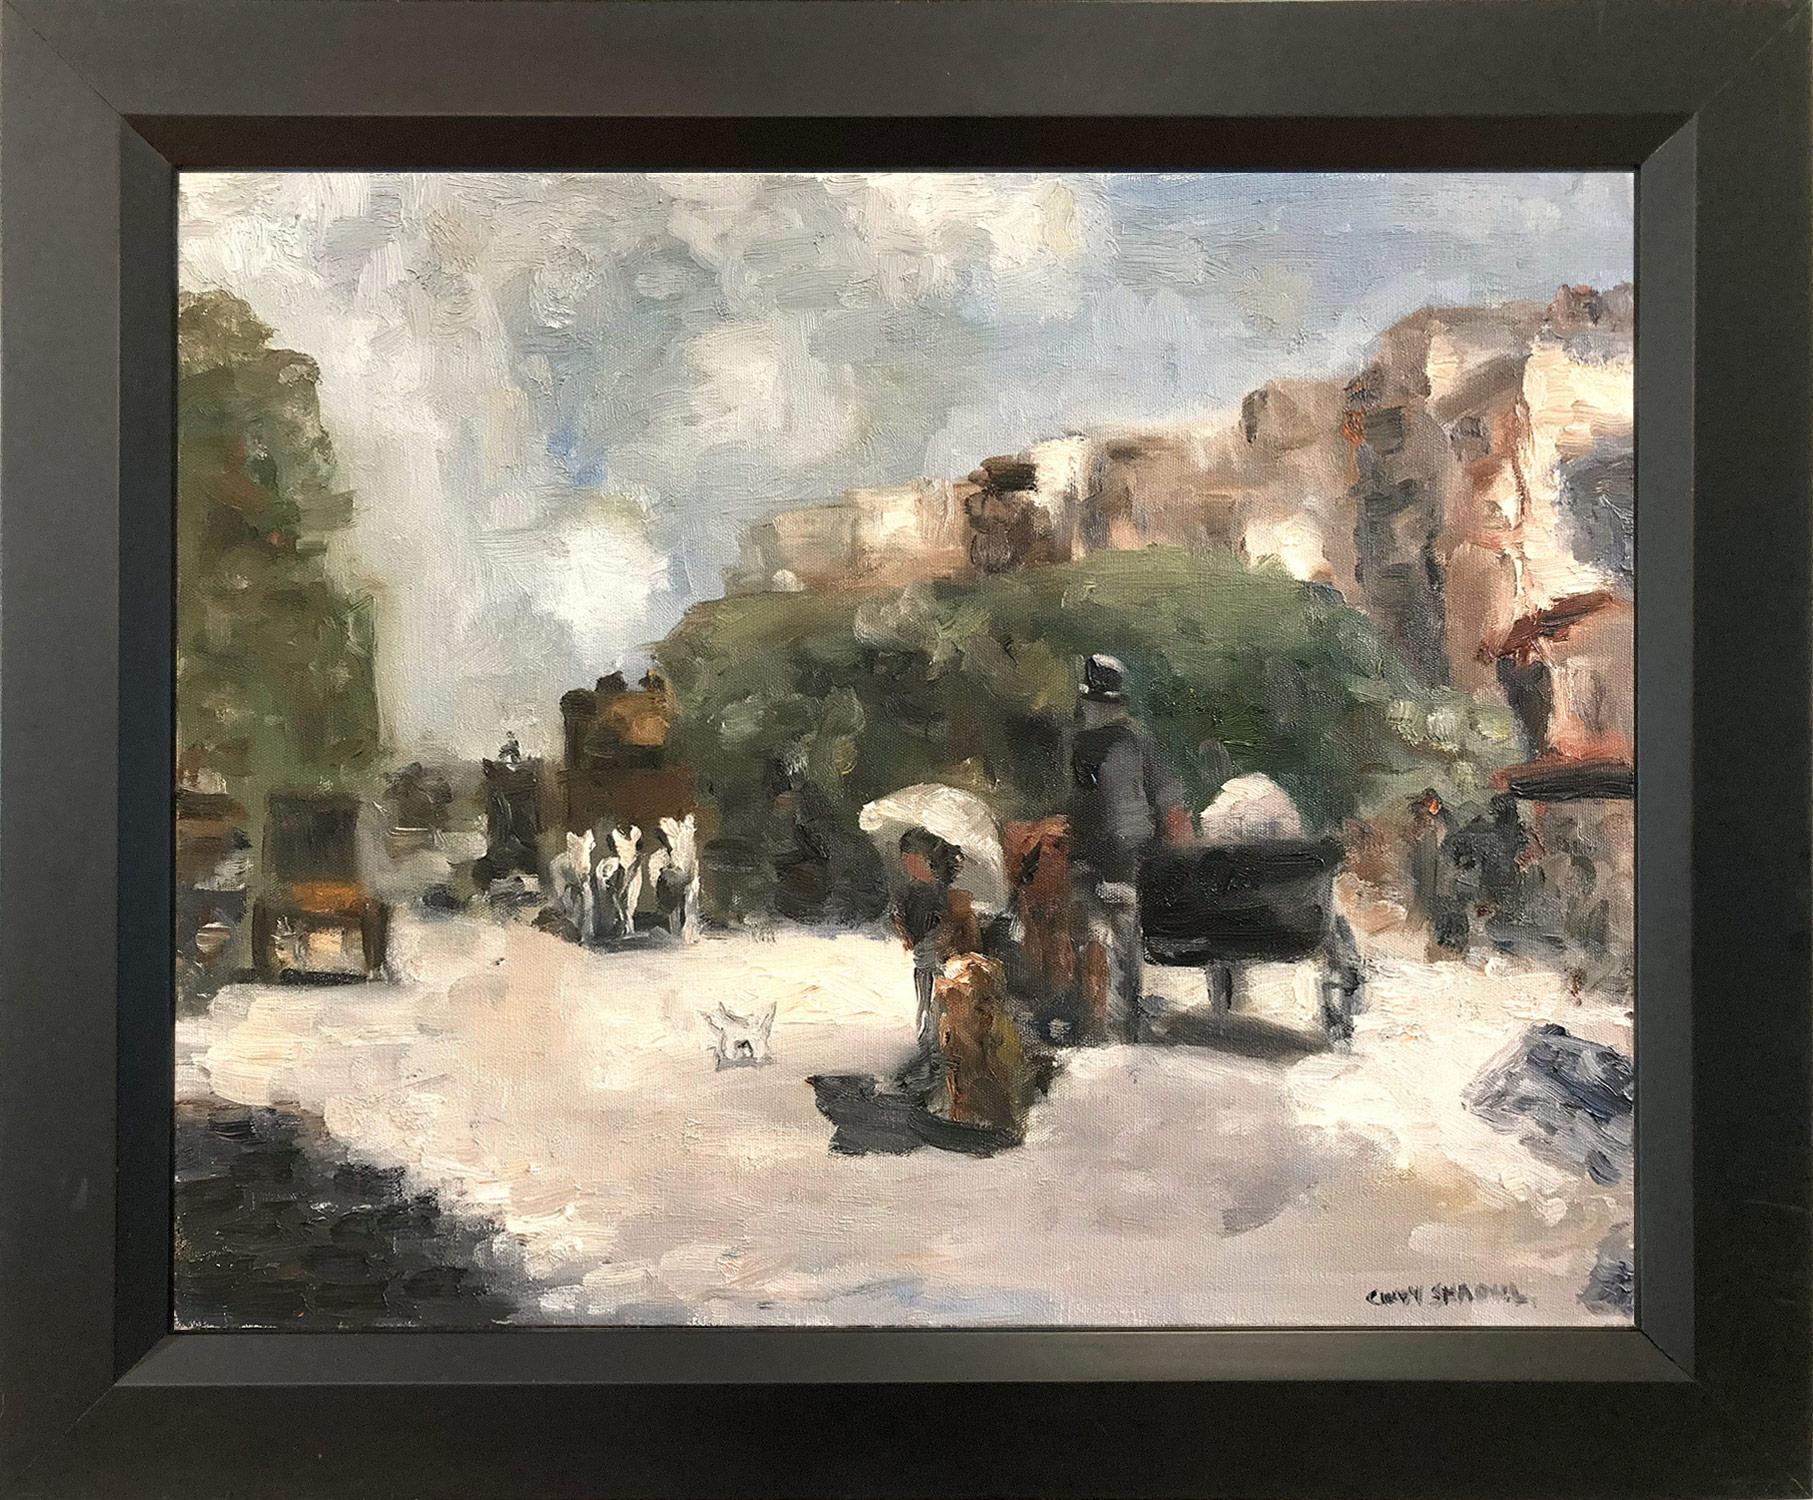 Cindy Shaoul Landscape Painting - "Day Stroll in Paris" American Impressionist City Scene Oil Painting on Canvas